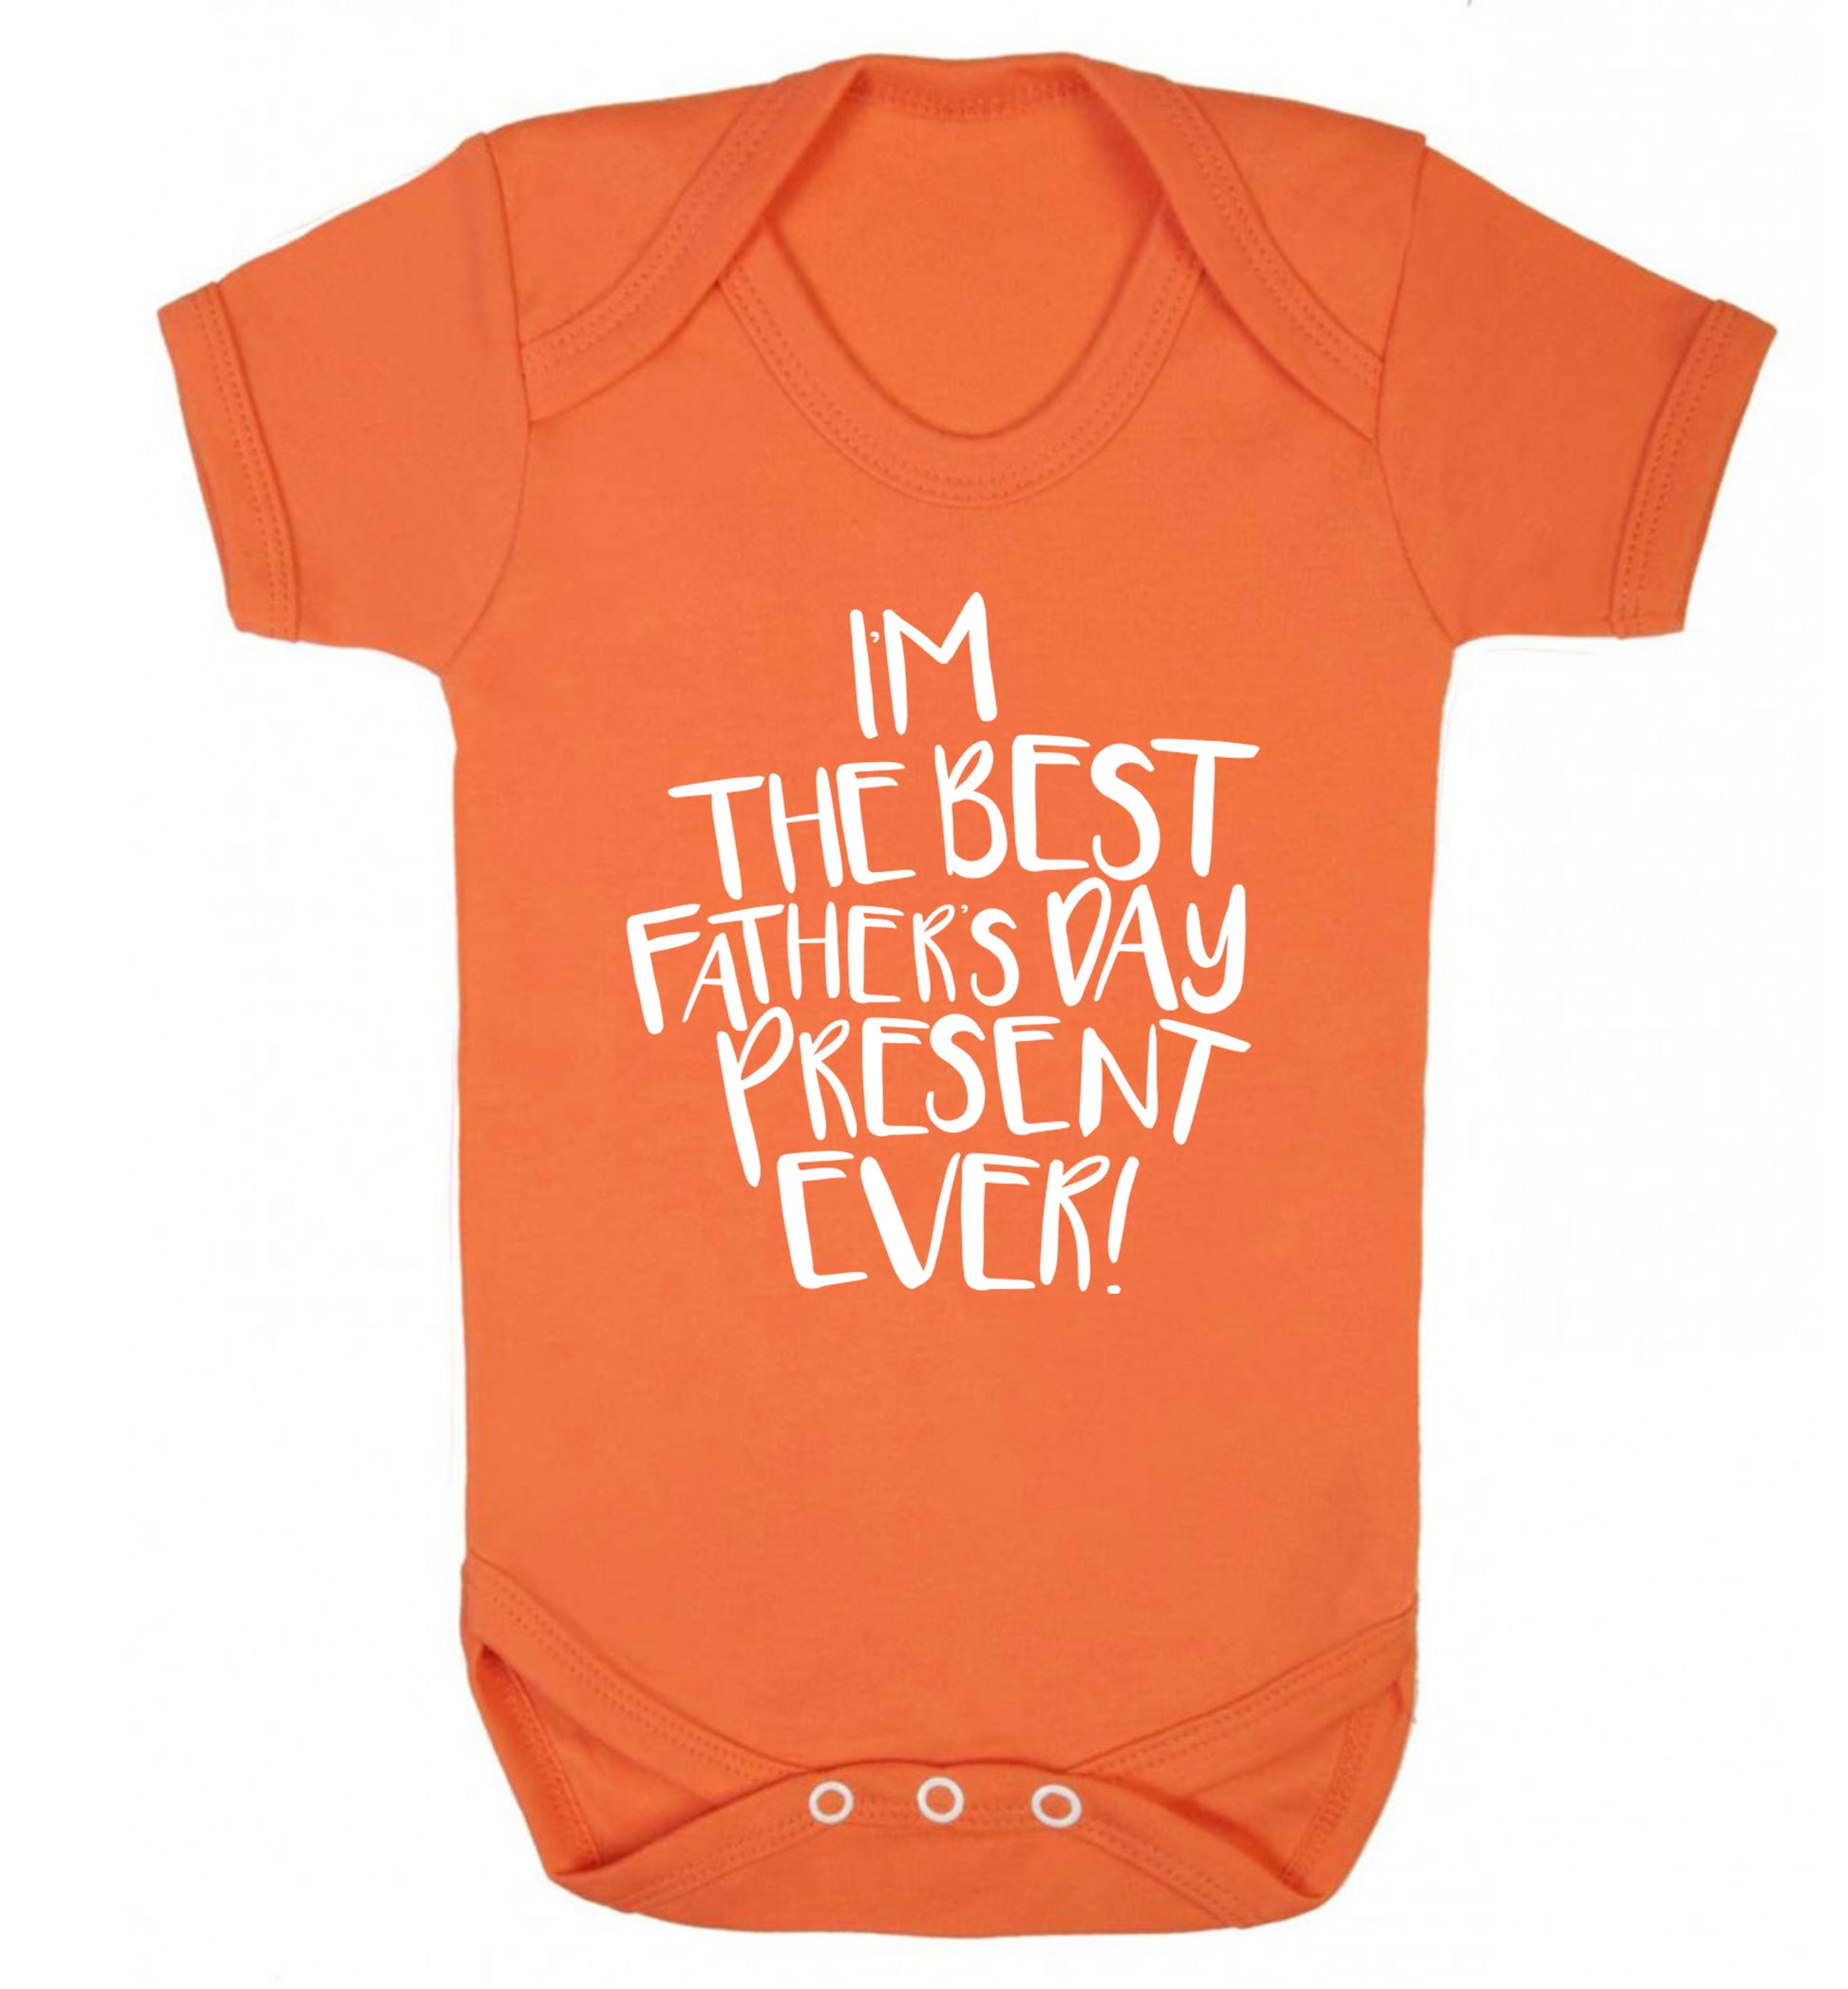 I'm the best father's day present ever! Baby Vest orange 18-24 months